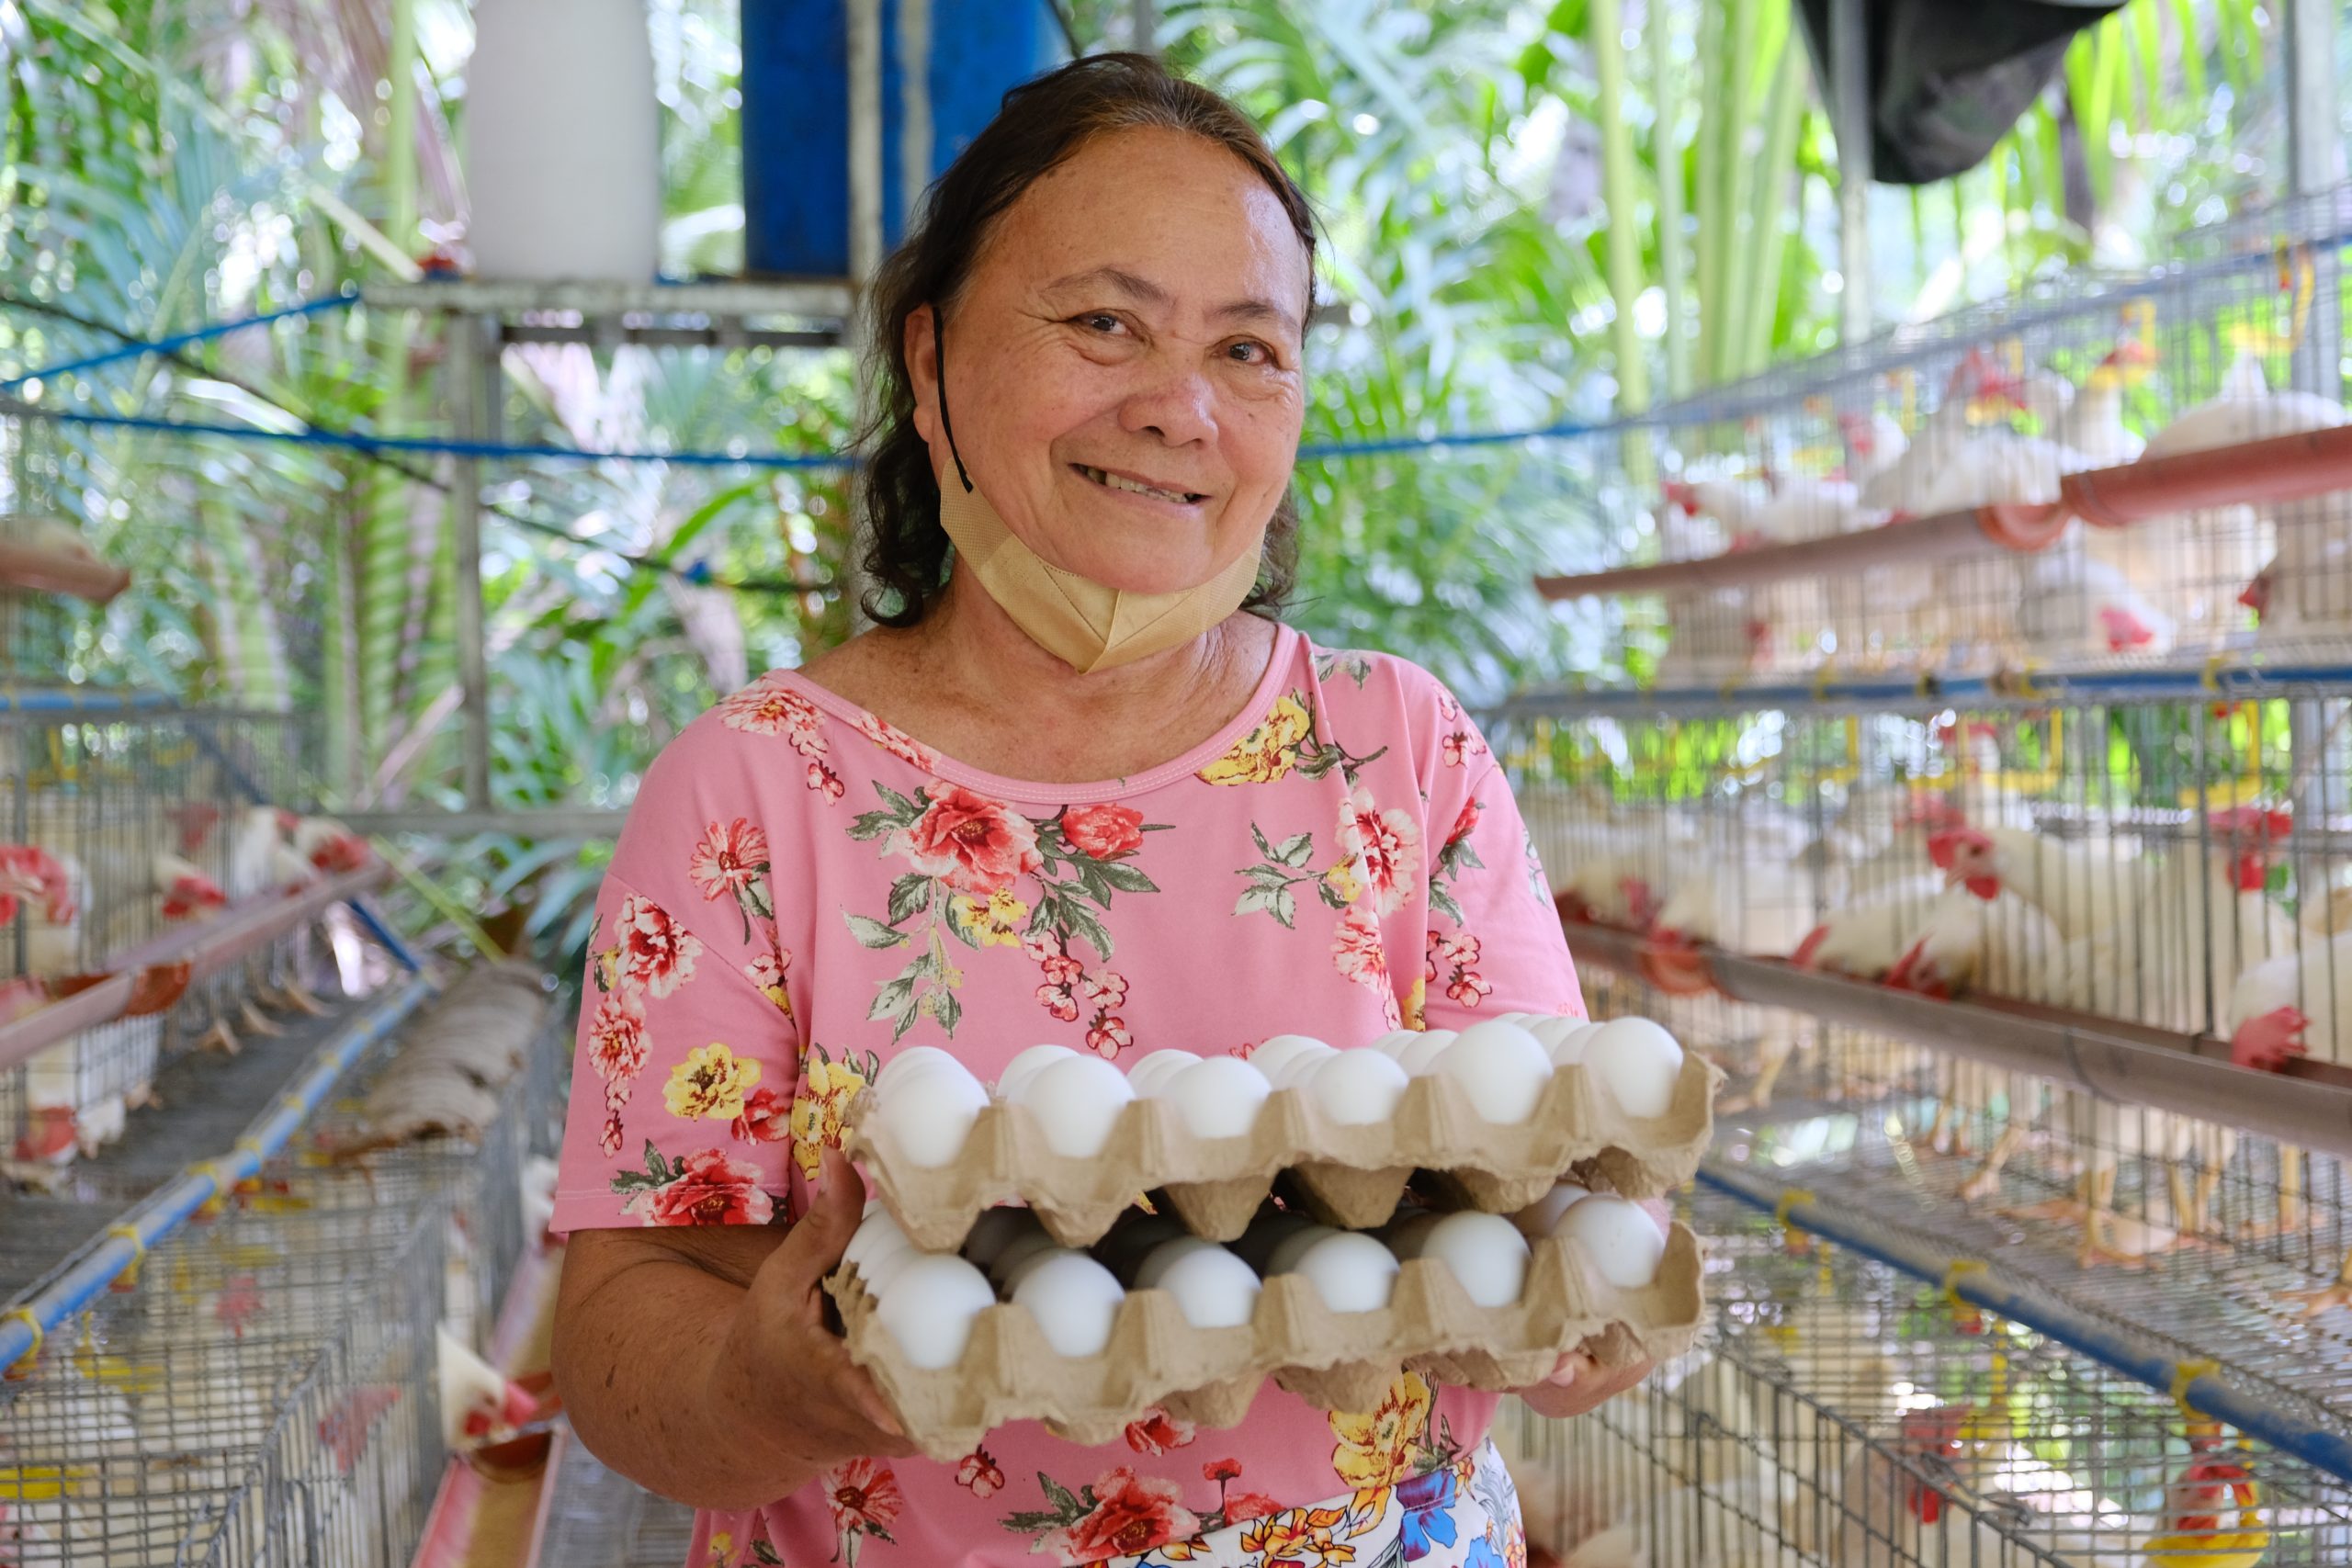 Sarangani Island FA earns 140k from SAAD’s chicken project, provides employment to locals